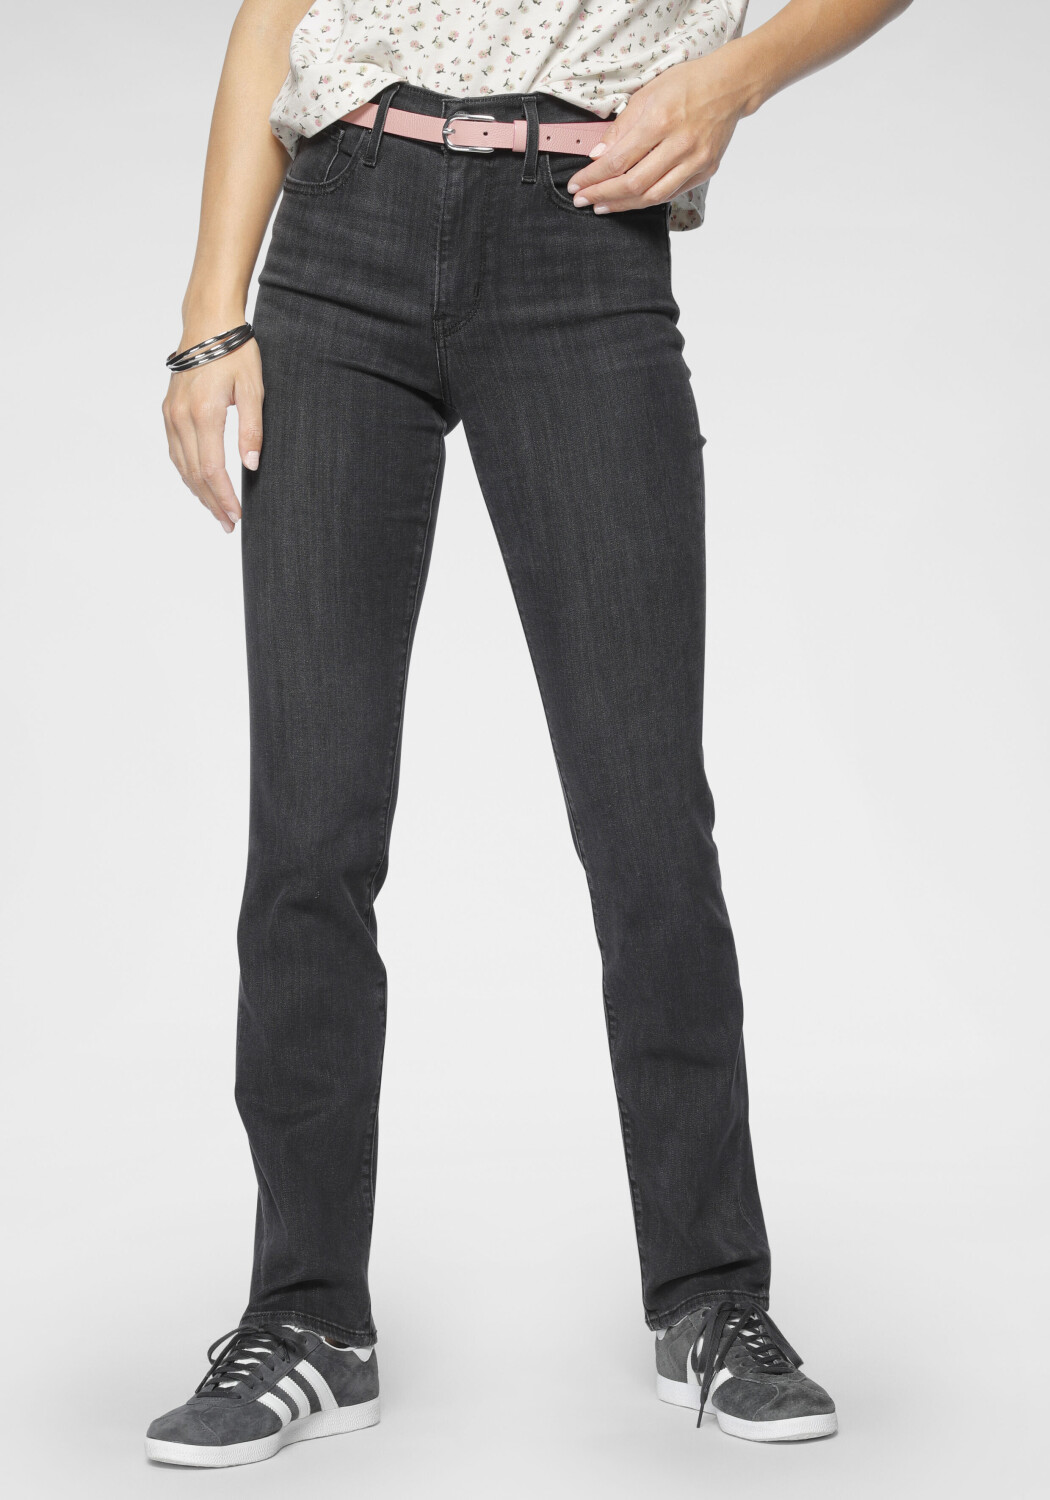 Buy Levi's 724 High Rise Straight Jeans from £16.56 (Today) – Best Deals on